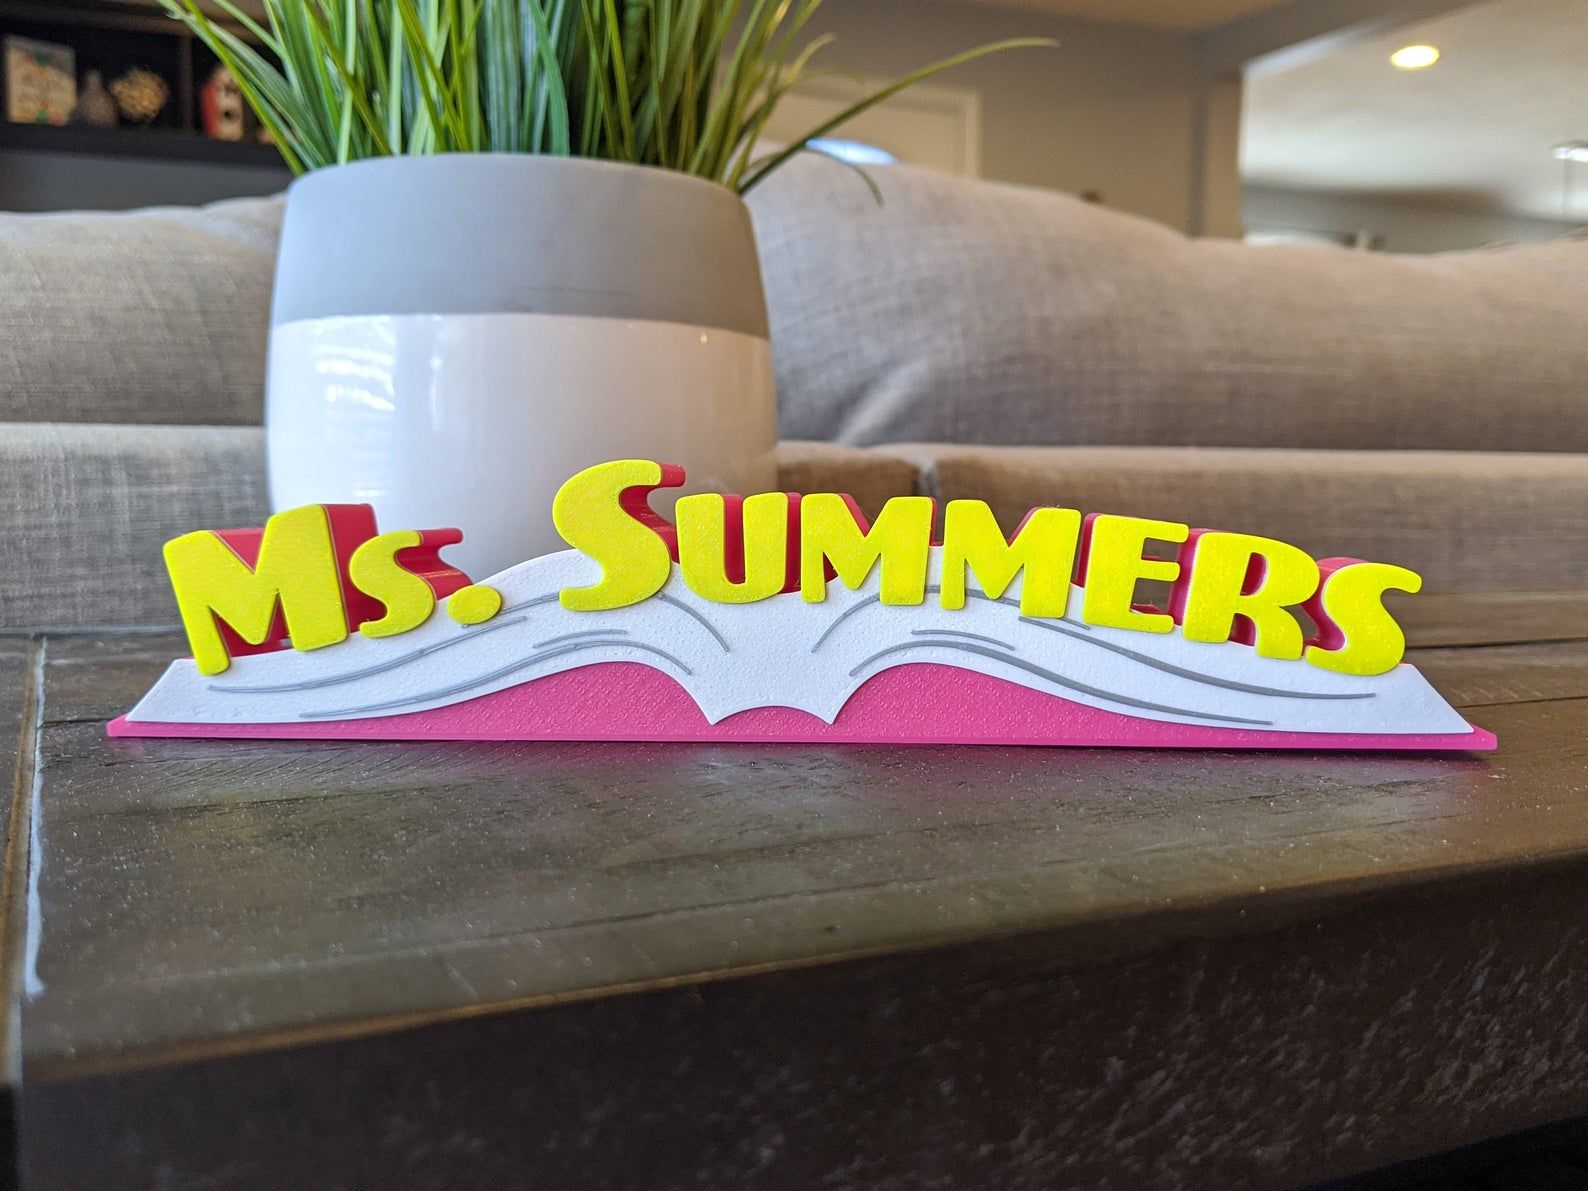 An image iof a name plate sitting on a wooden table with a couch and plant in the background. The name plate is in the shape of a pink open book, and the name "Ms. Summers" appears in yellow text on the book.